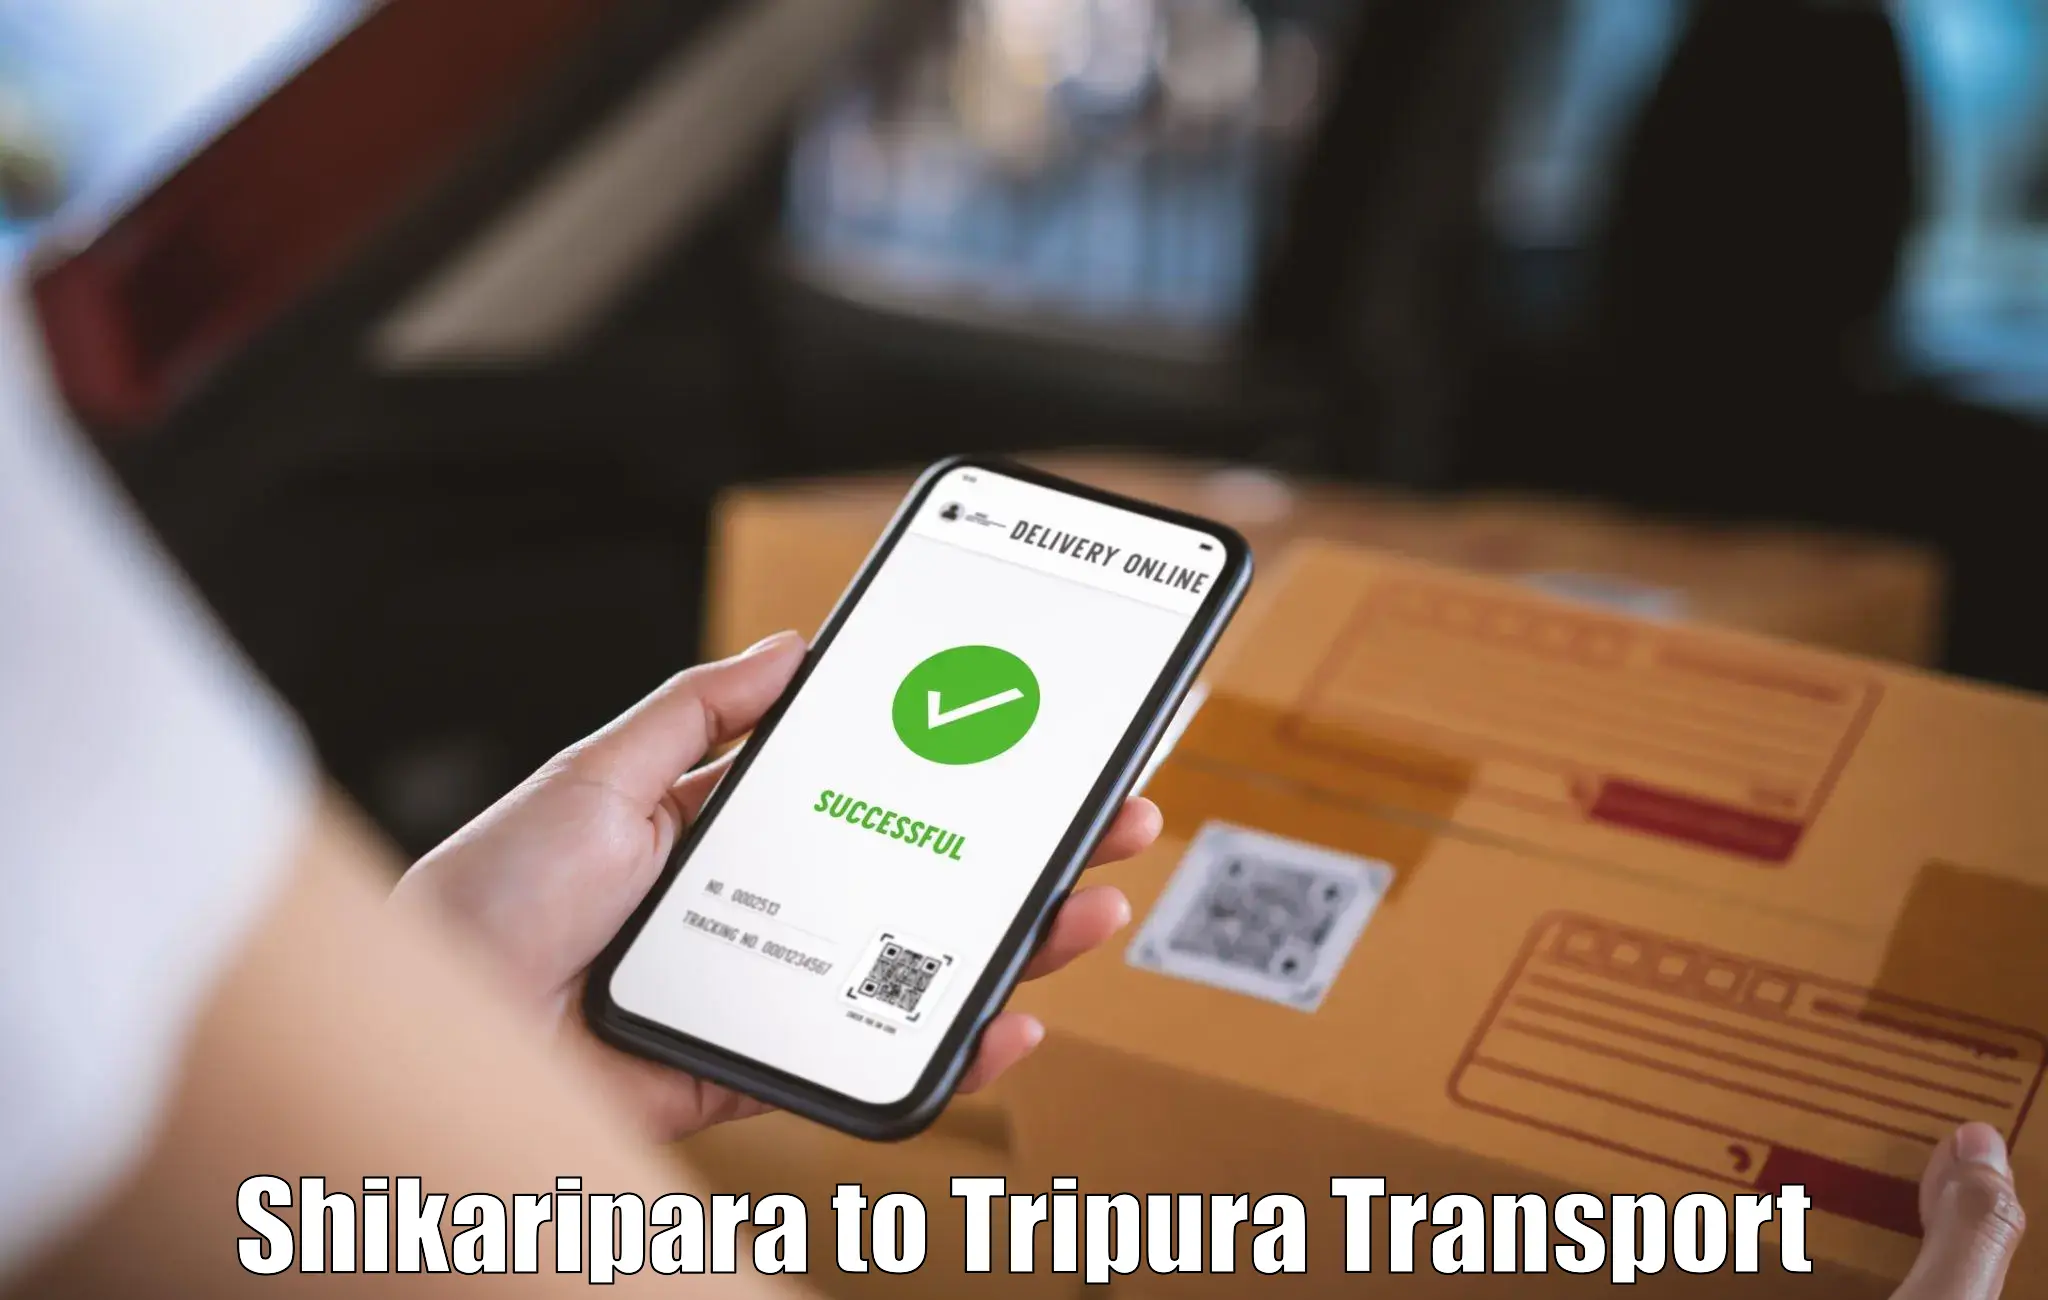 Delivery service Shikaripara to West Tripura